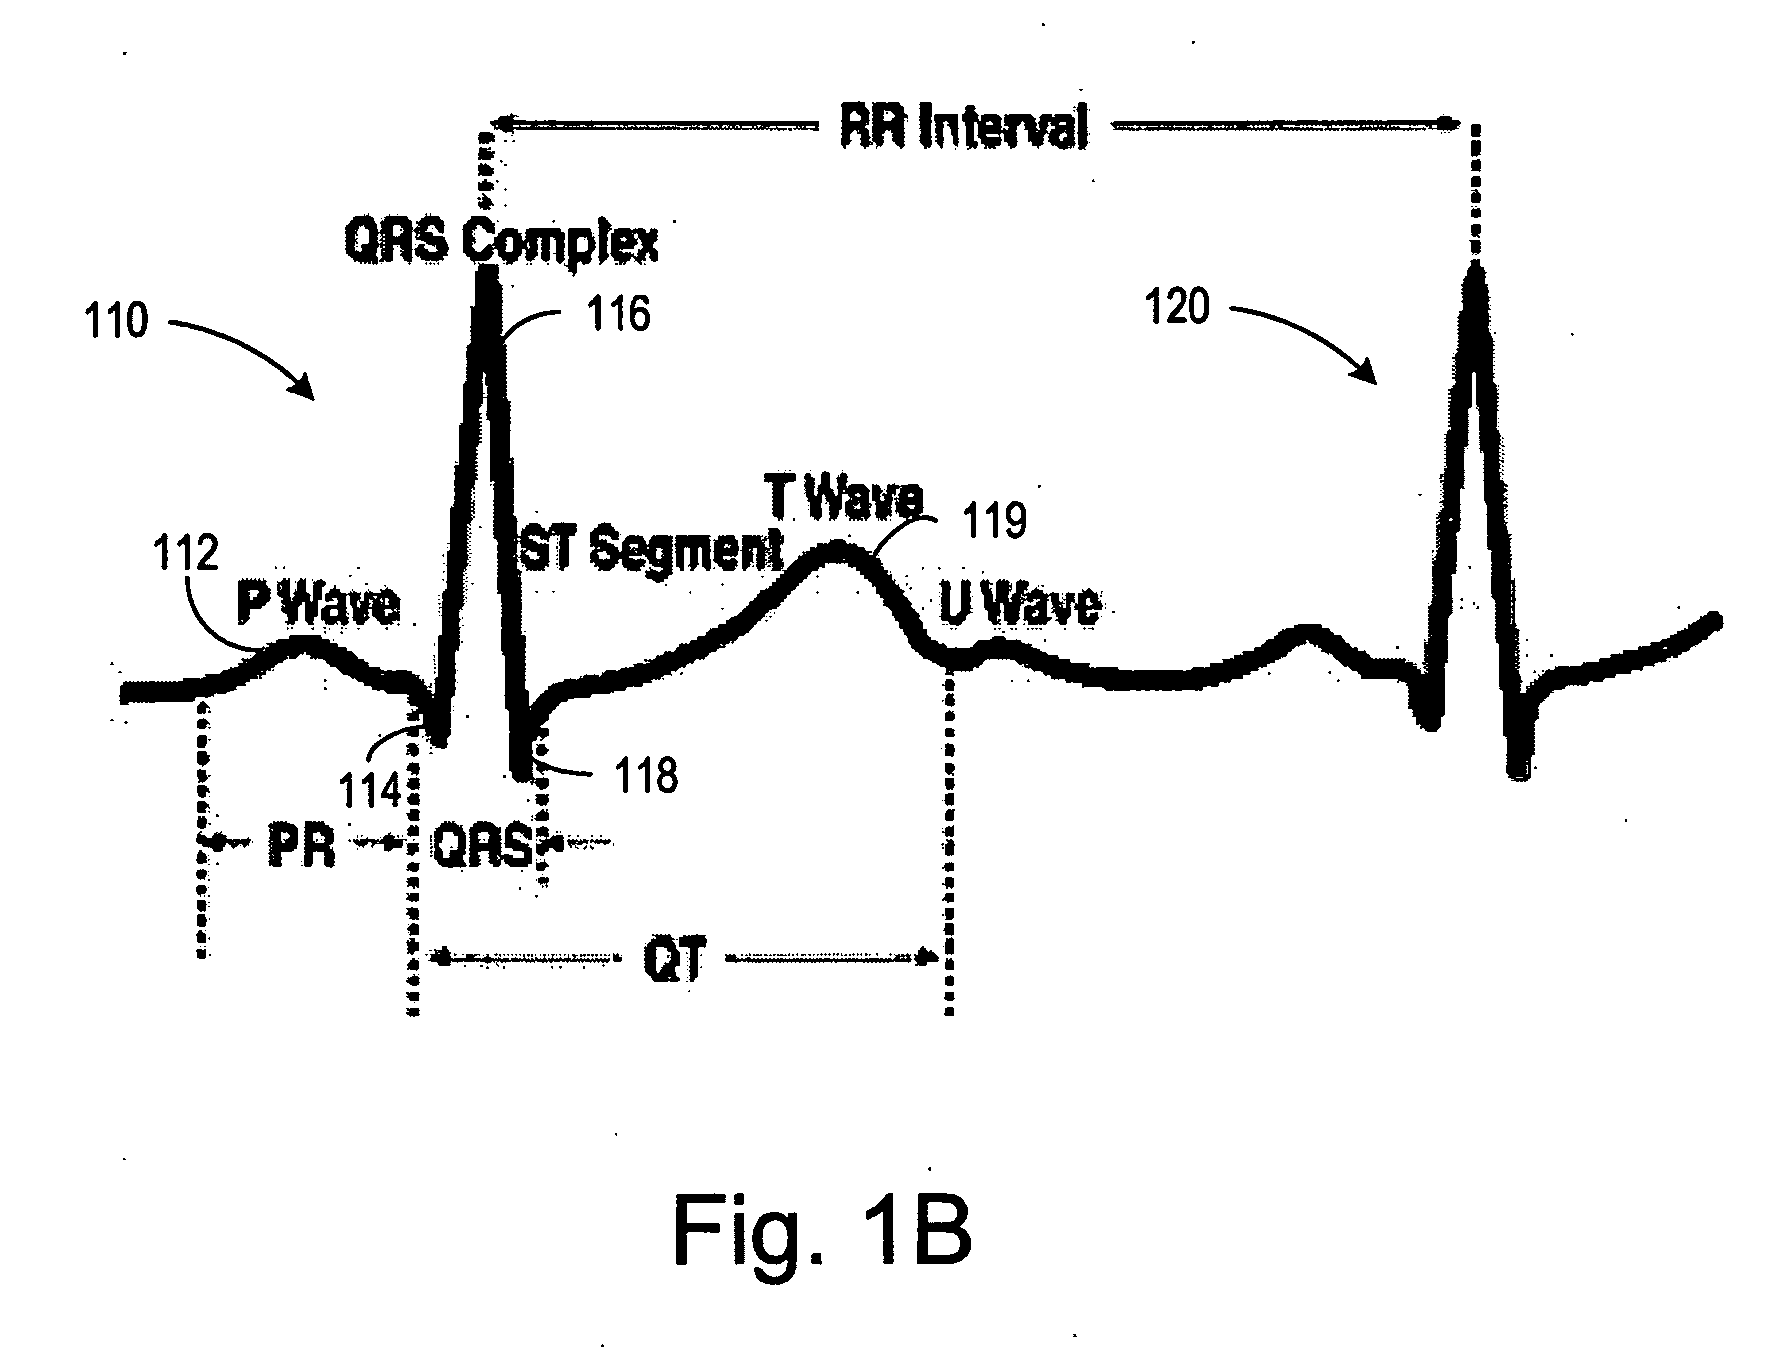 Posture monitoring using cardiac activation sequences